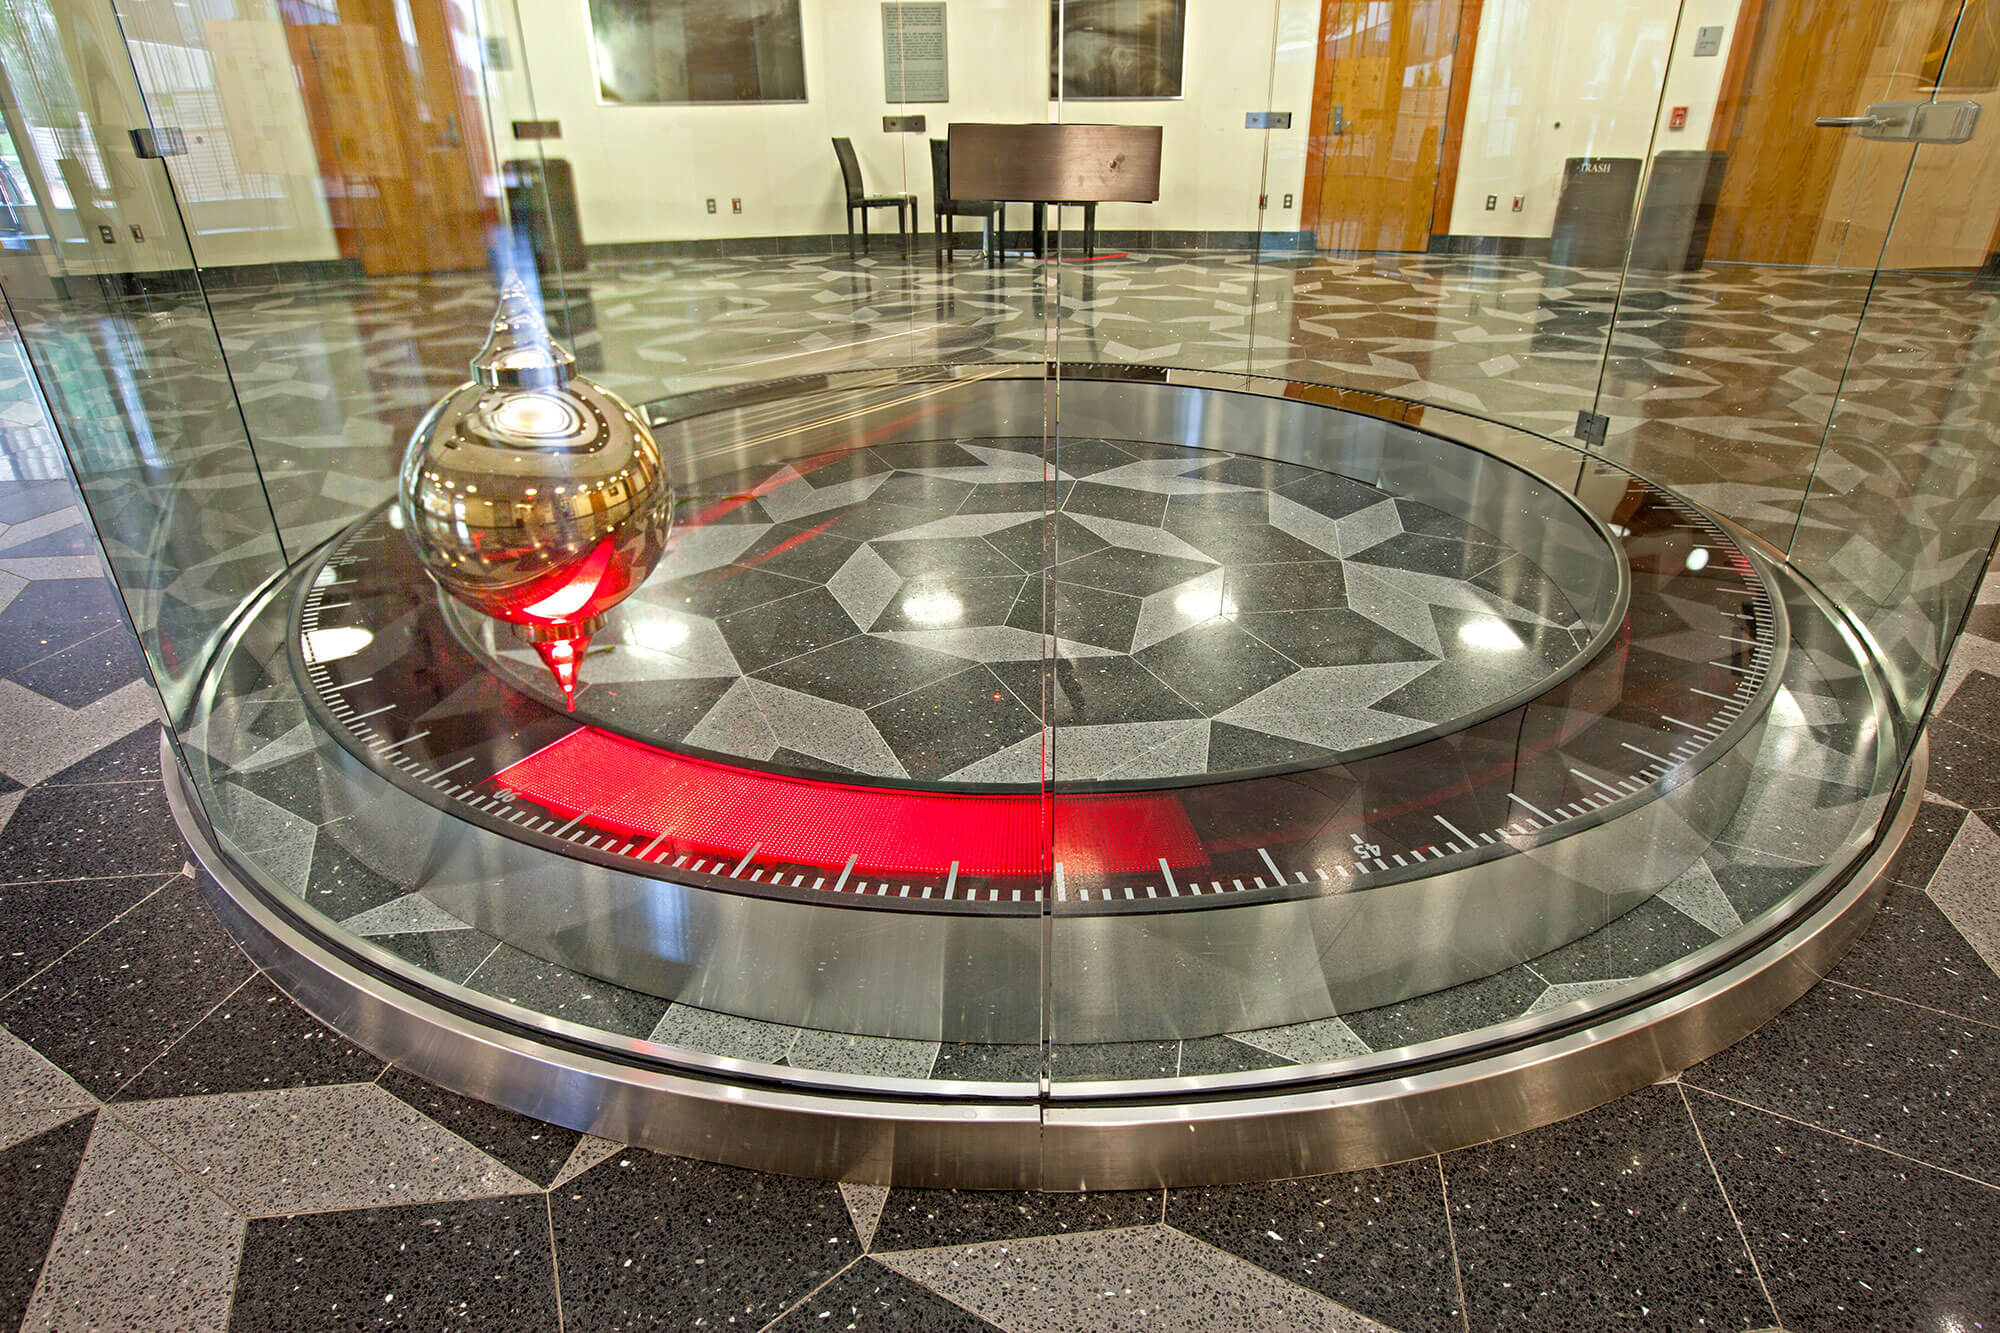 This huge pendulum seems to be rotating on it’s own plane of oscillation, but is it?